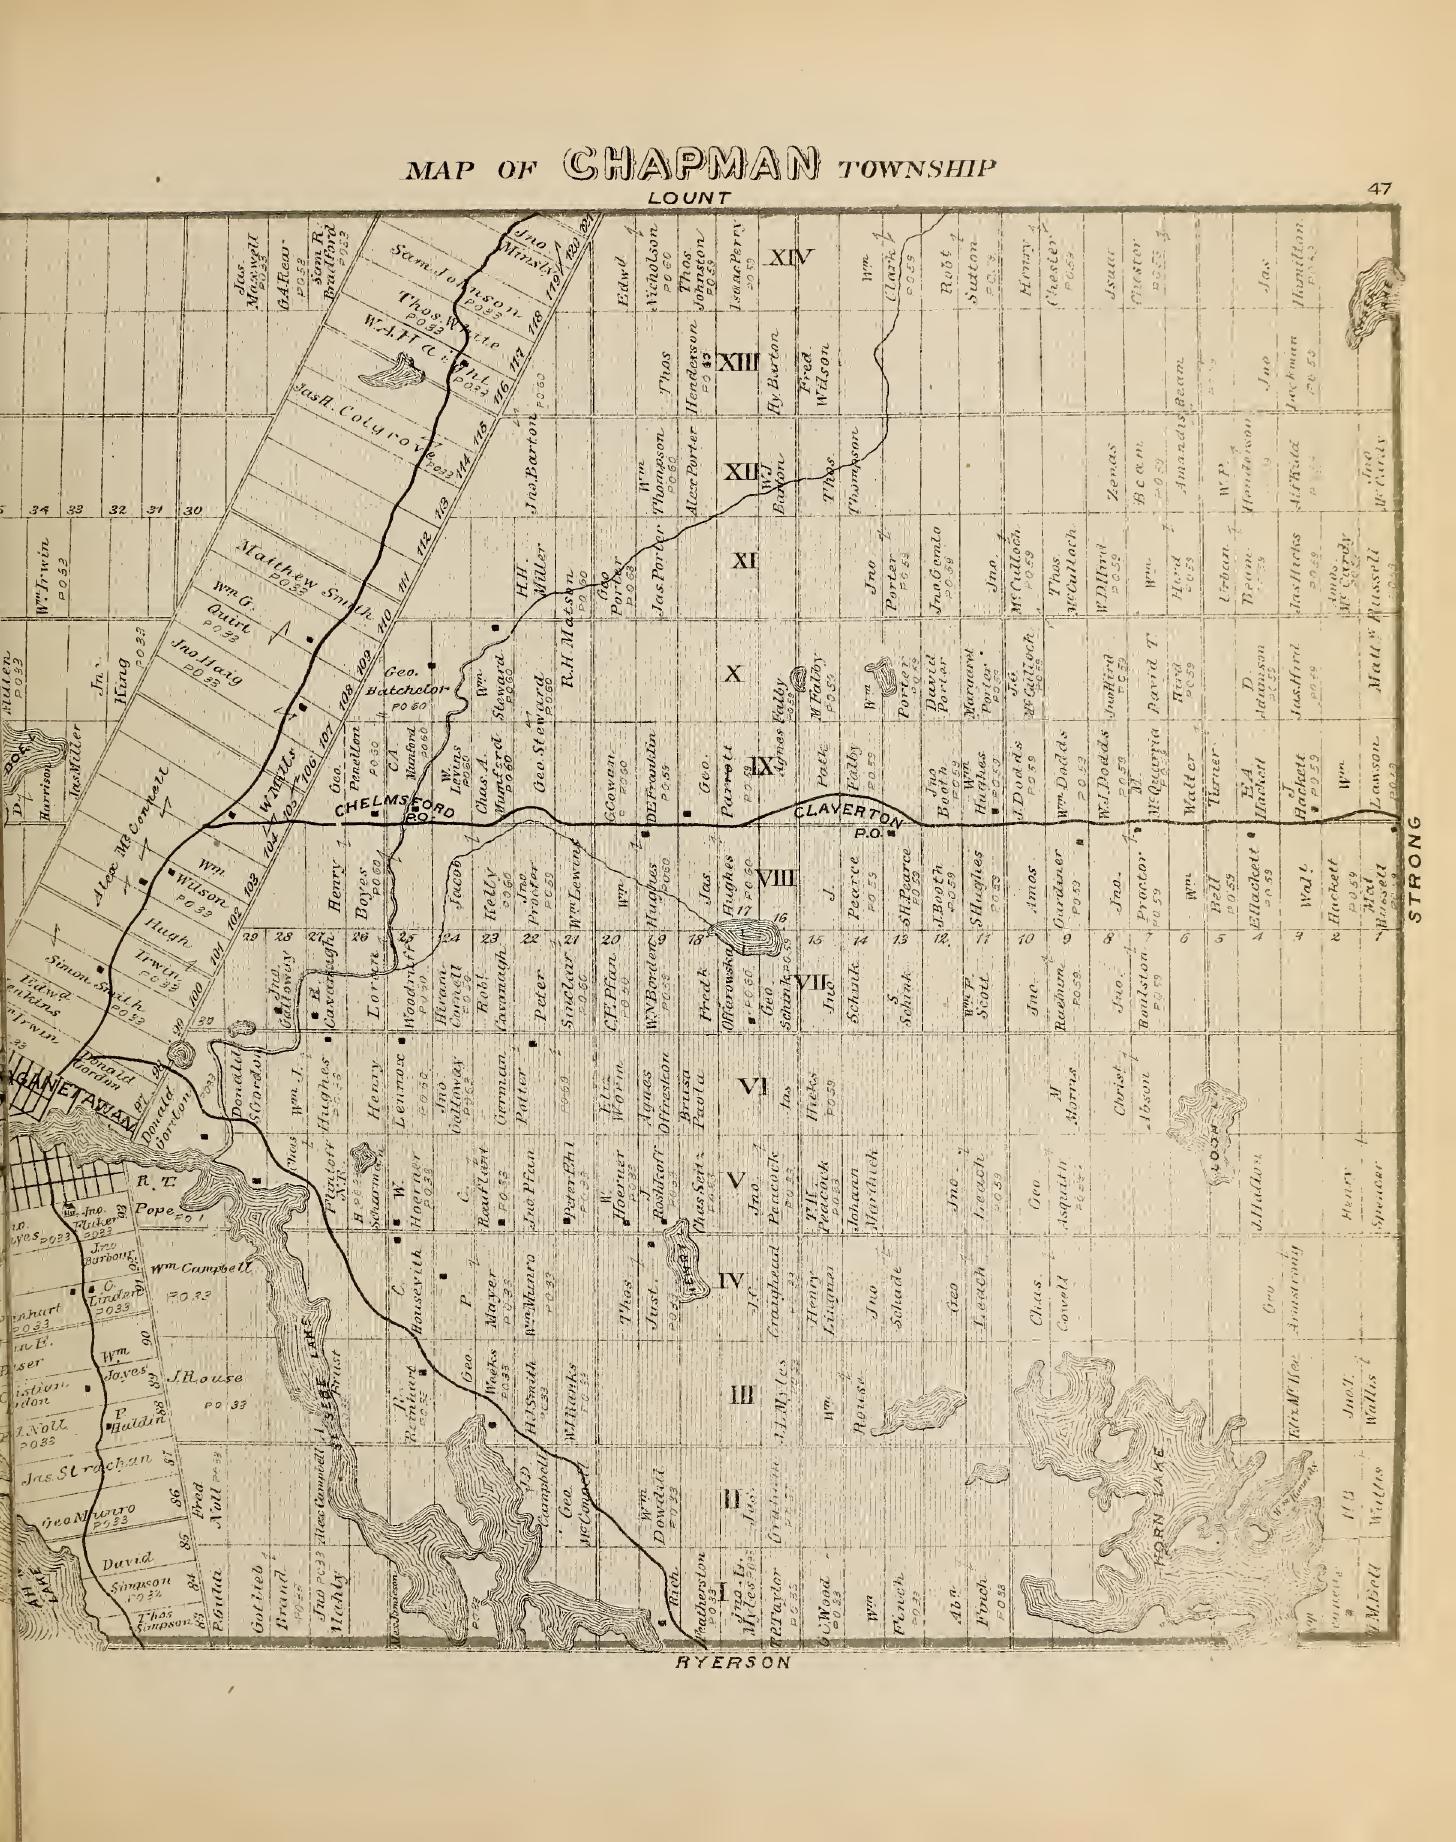 Historical map showing Concessions and Lots for chapman